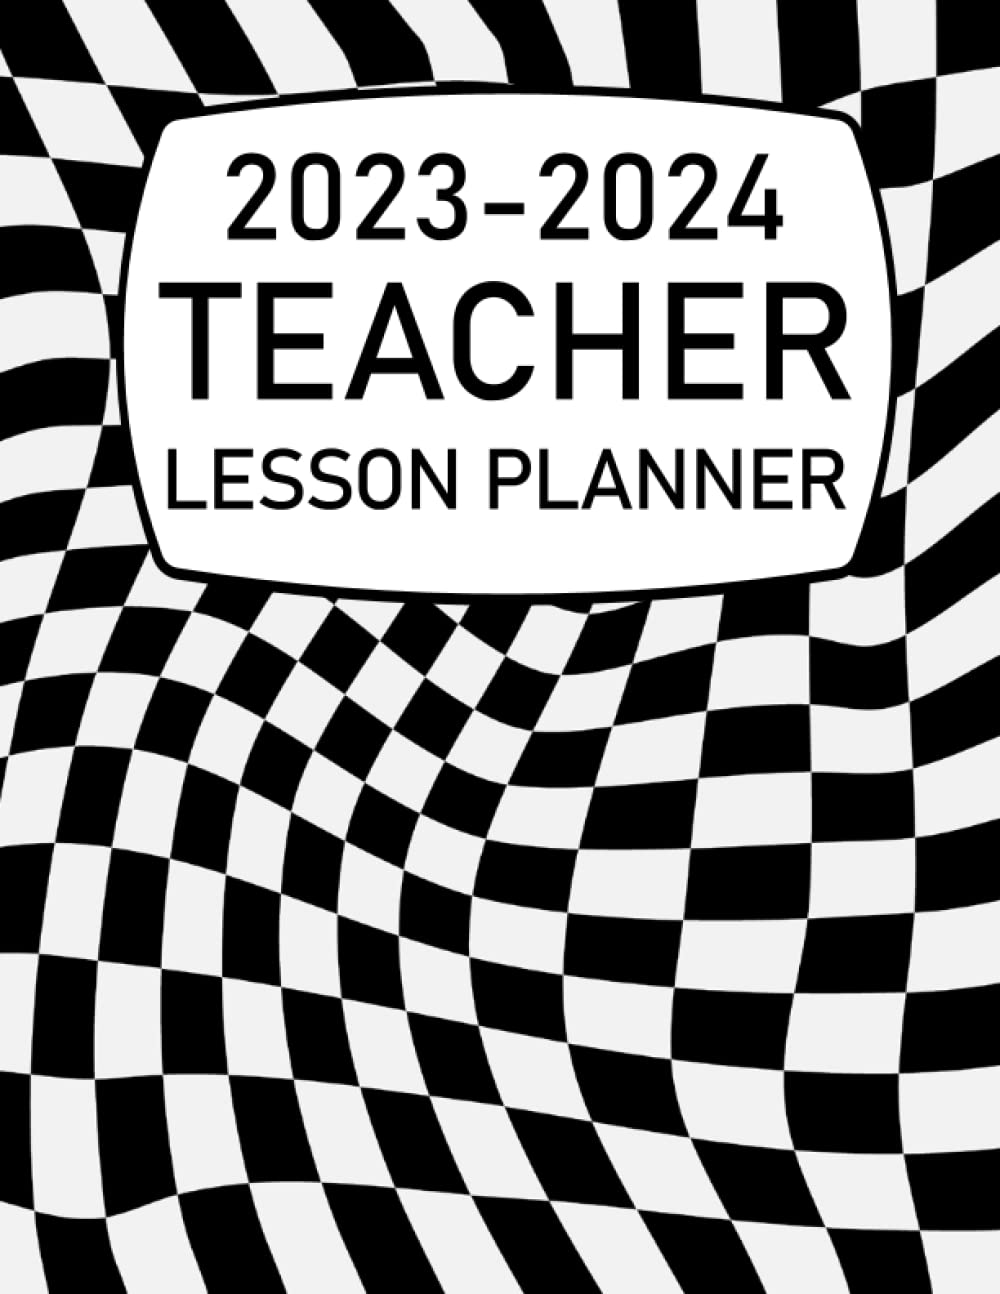 Teacher Lesson Planner 2023-2024: Wavy Checkered Pattern, Monthly and Weekly Class Organizer for Teachers With Gradebook